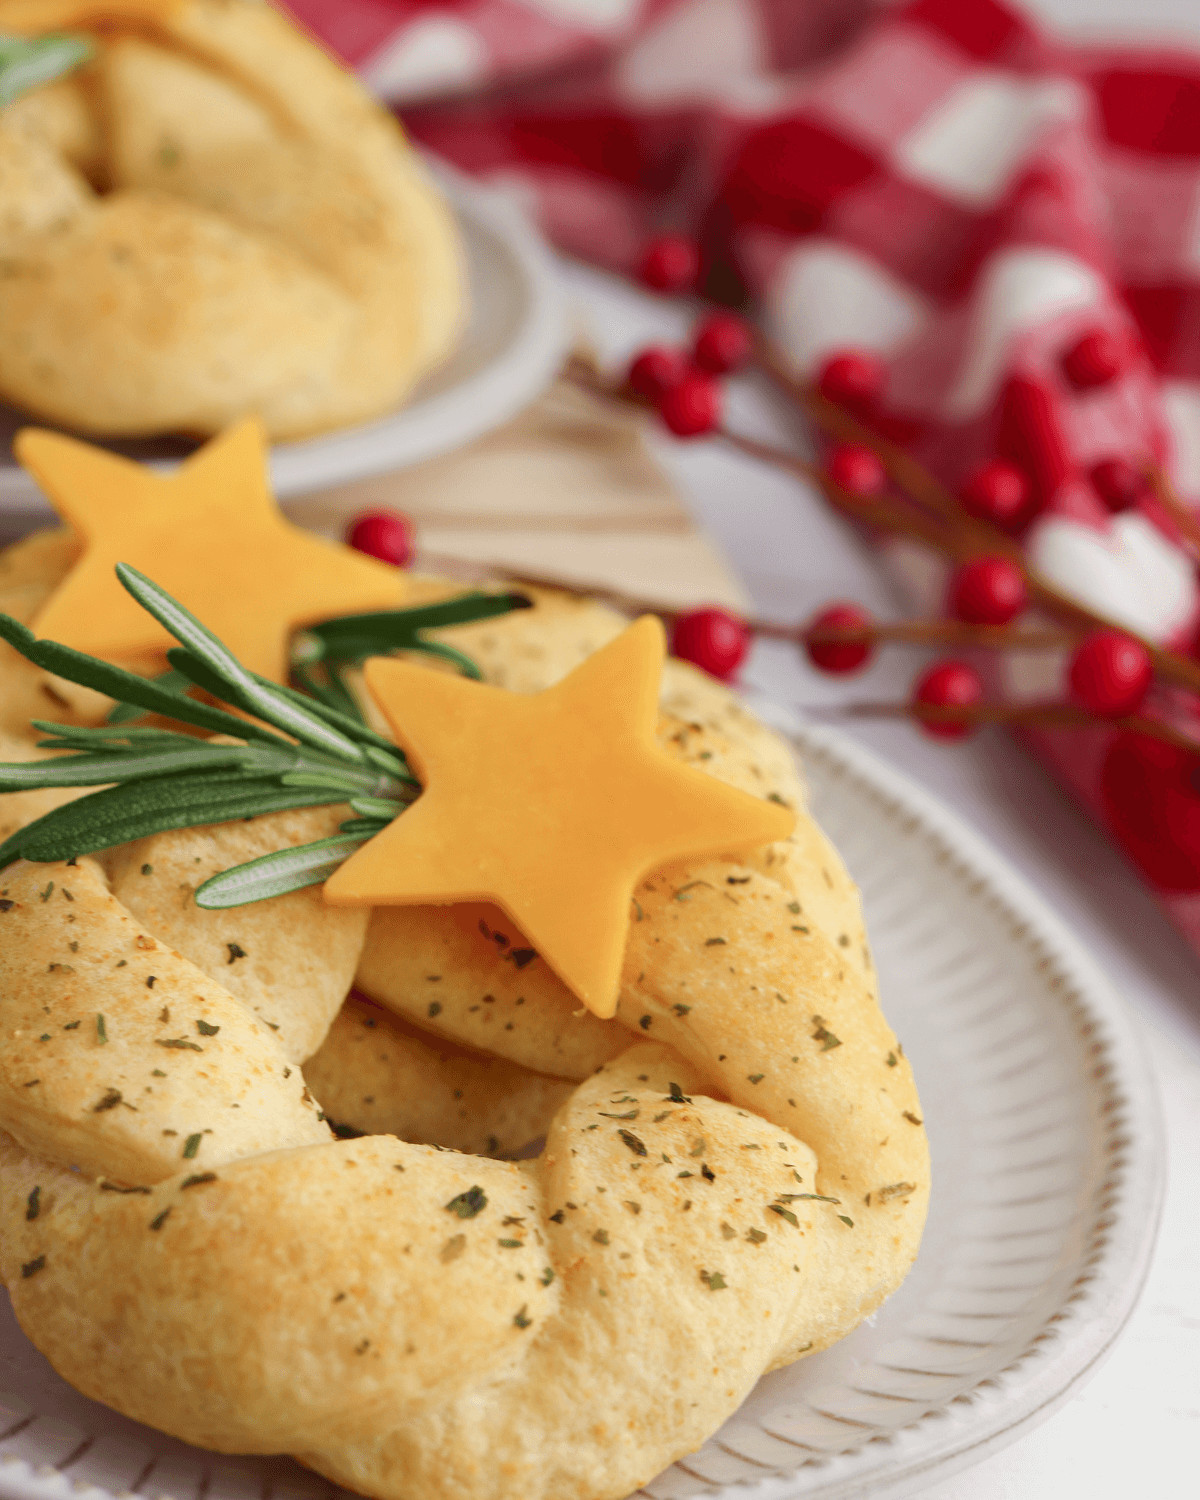 The Christmas Wreath Appetizer with a sprig of rosemary and cheese stars.